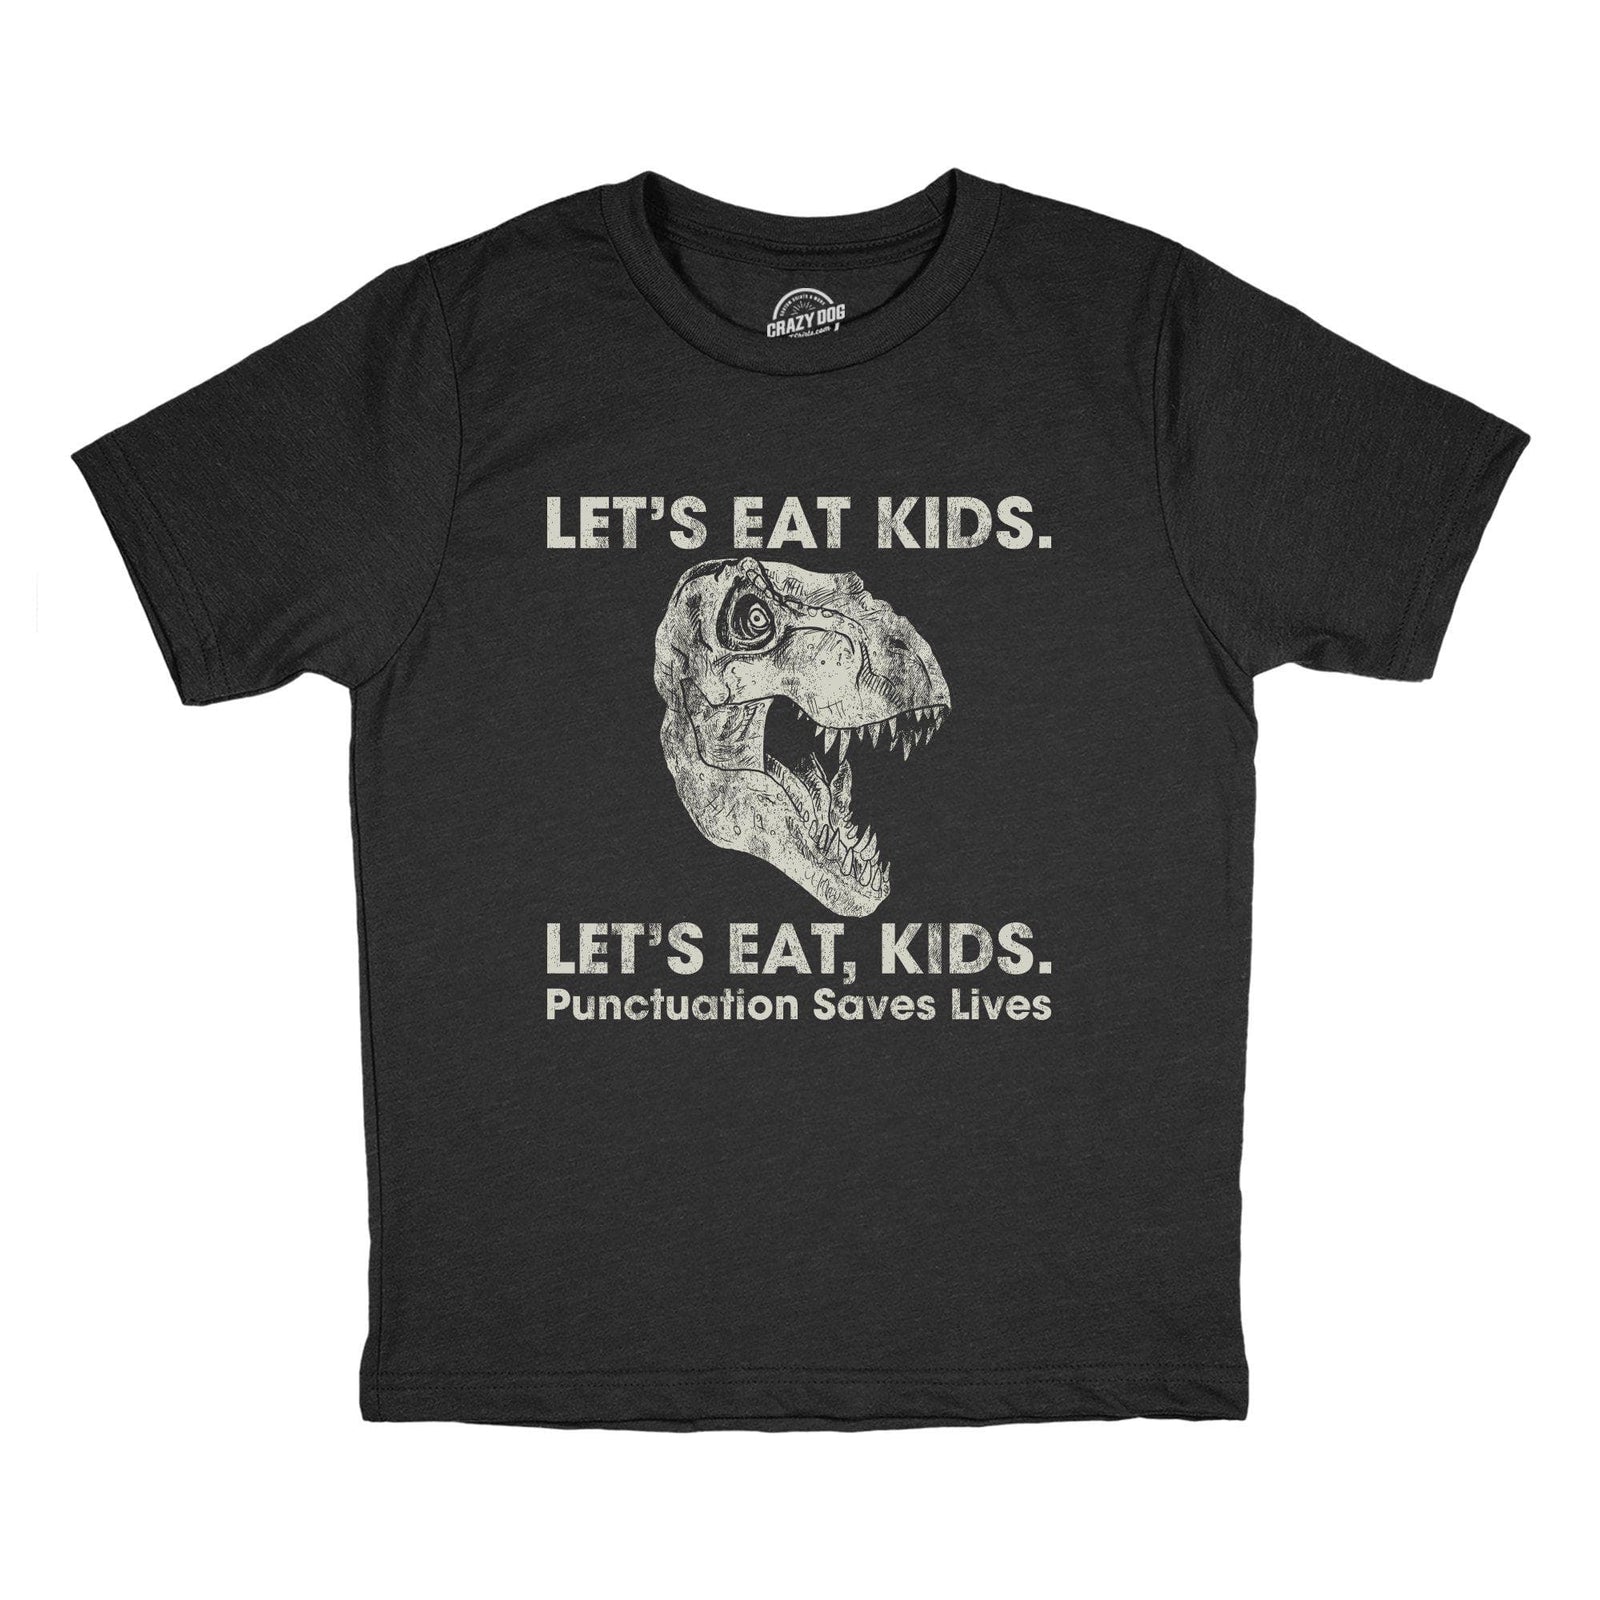  Youth Eat Sleep Fish T Shirt Funny Fishing Tee Cool Graphic Fun  Crazy for Kids Funny T Shirts Funny Fishing T Shirt Novelty T Shirts for  Kids Blue S : Clothing